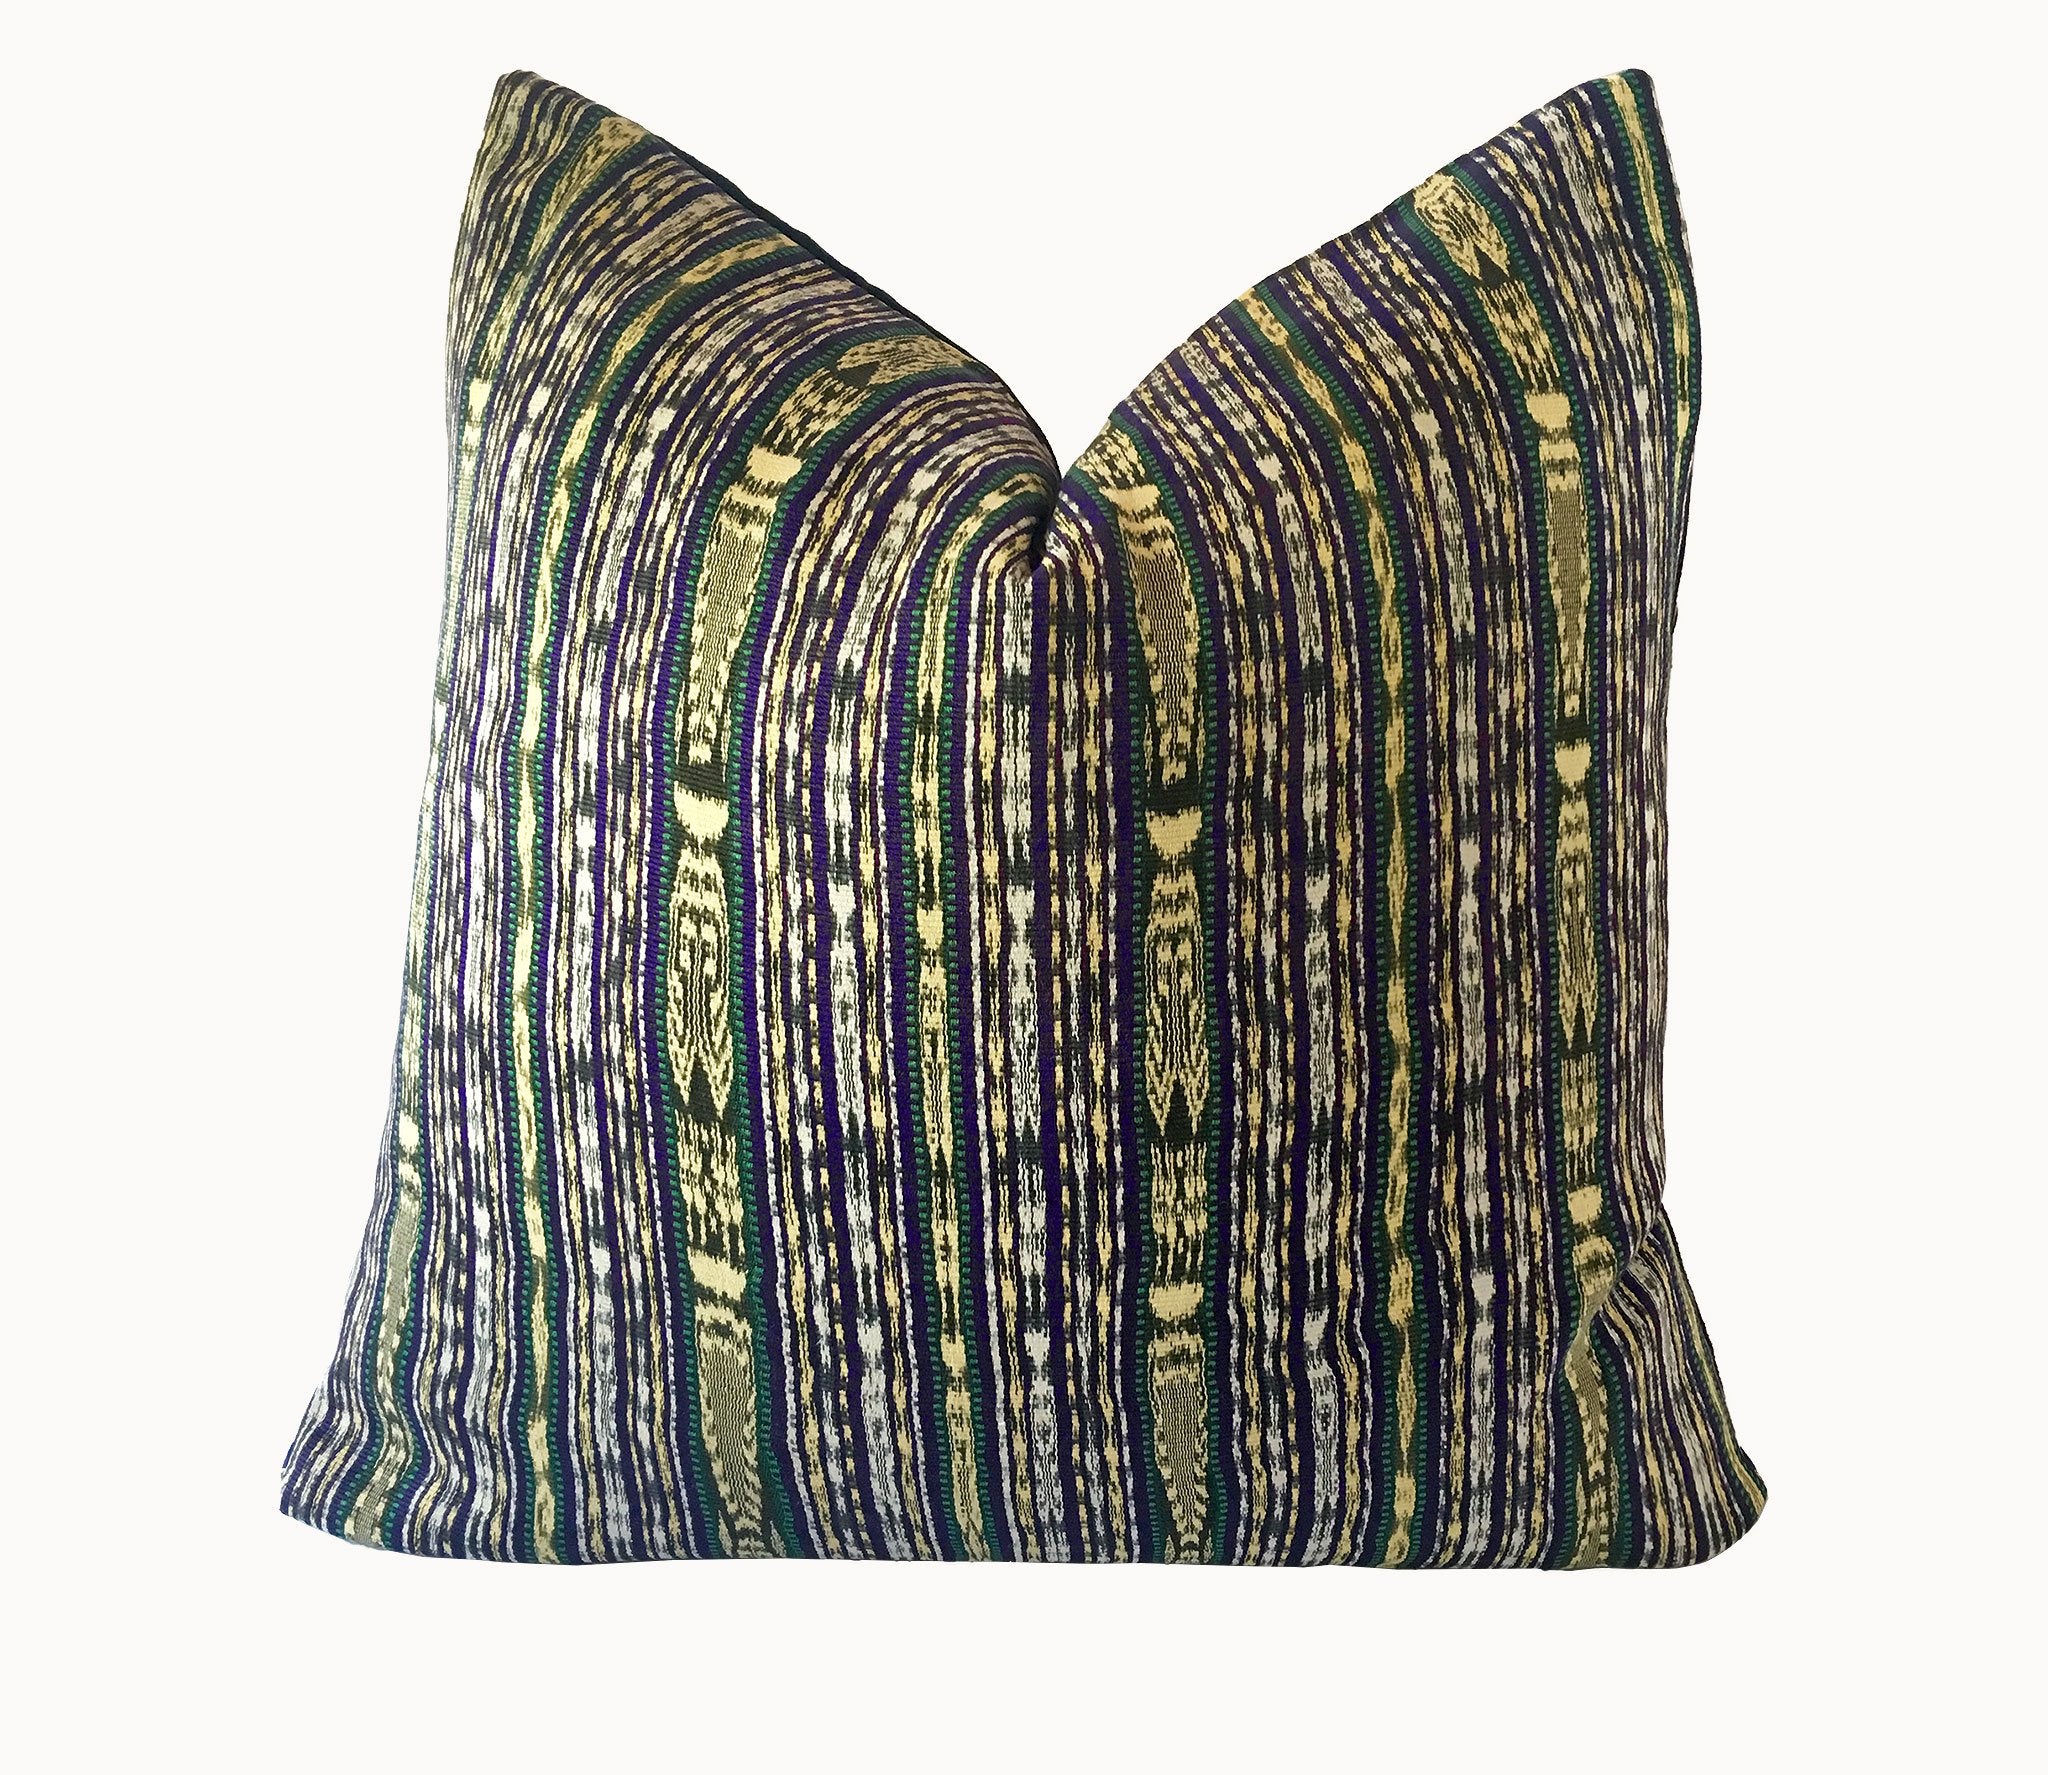 Guatemalan Textile Pillow, vintage, hand woven blue and yellow striped ikat throw cushion